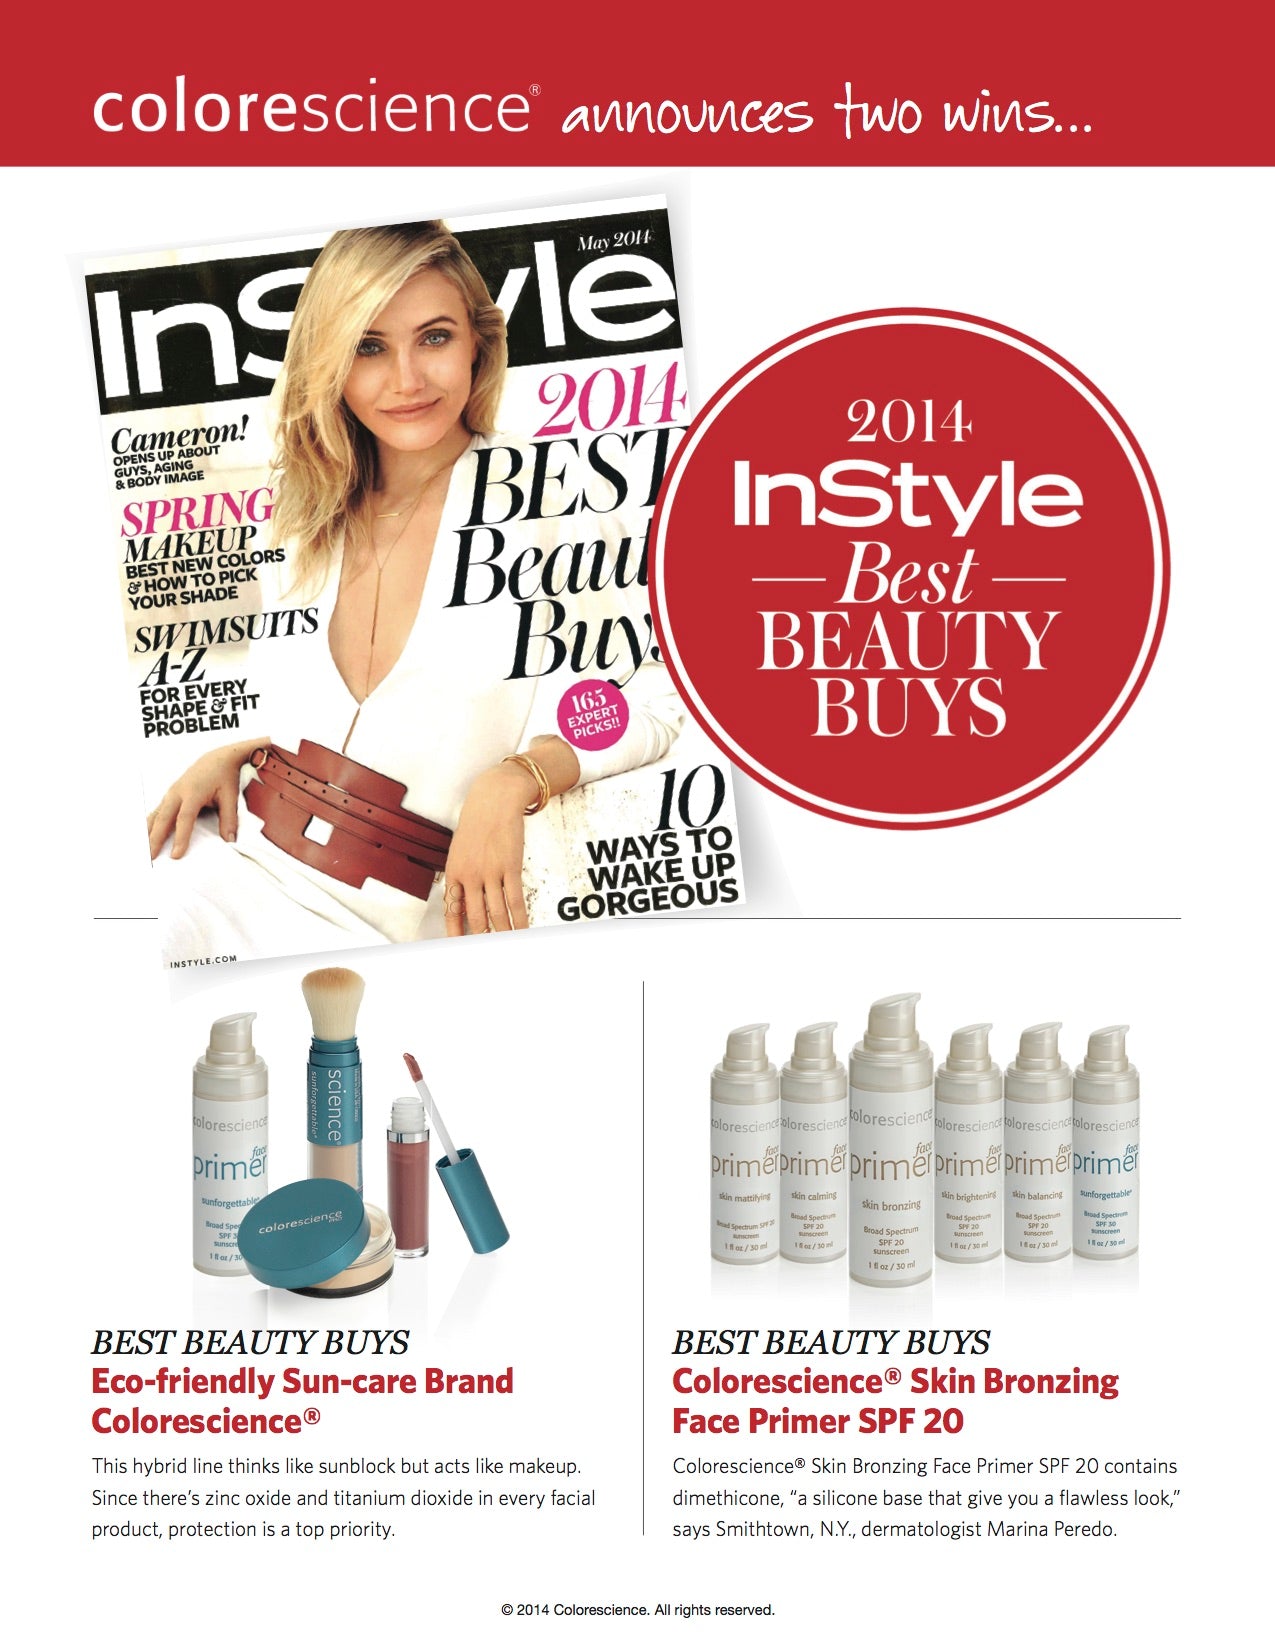 2014 InStyle Best Beauty Buys